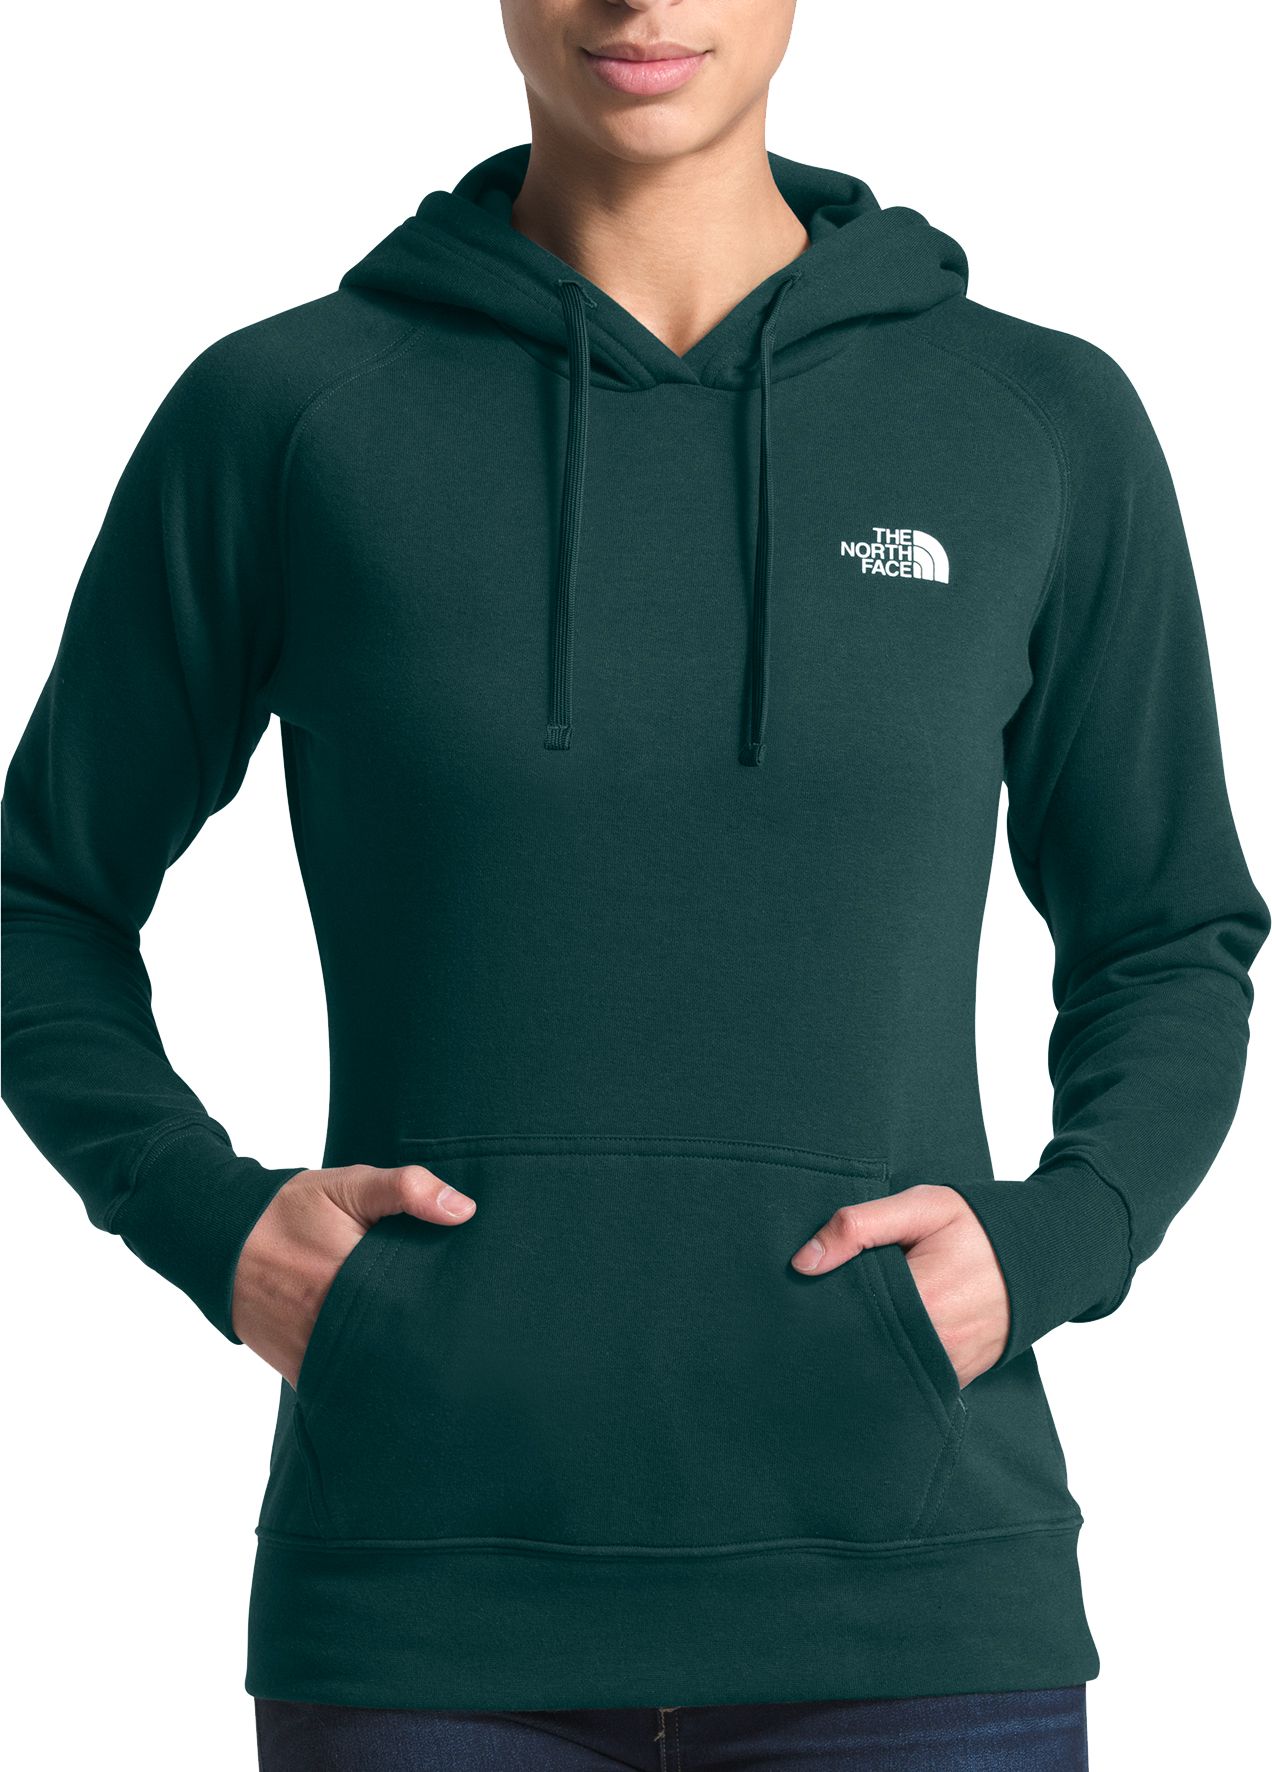 womens green north face hoodie